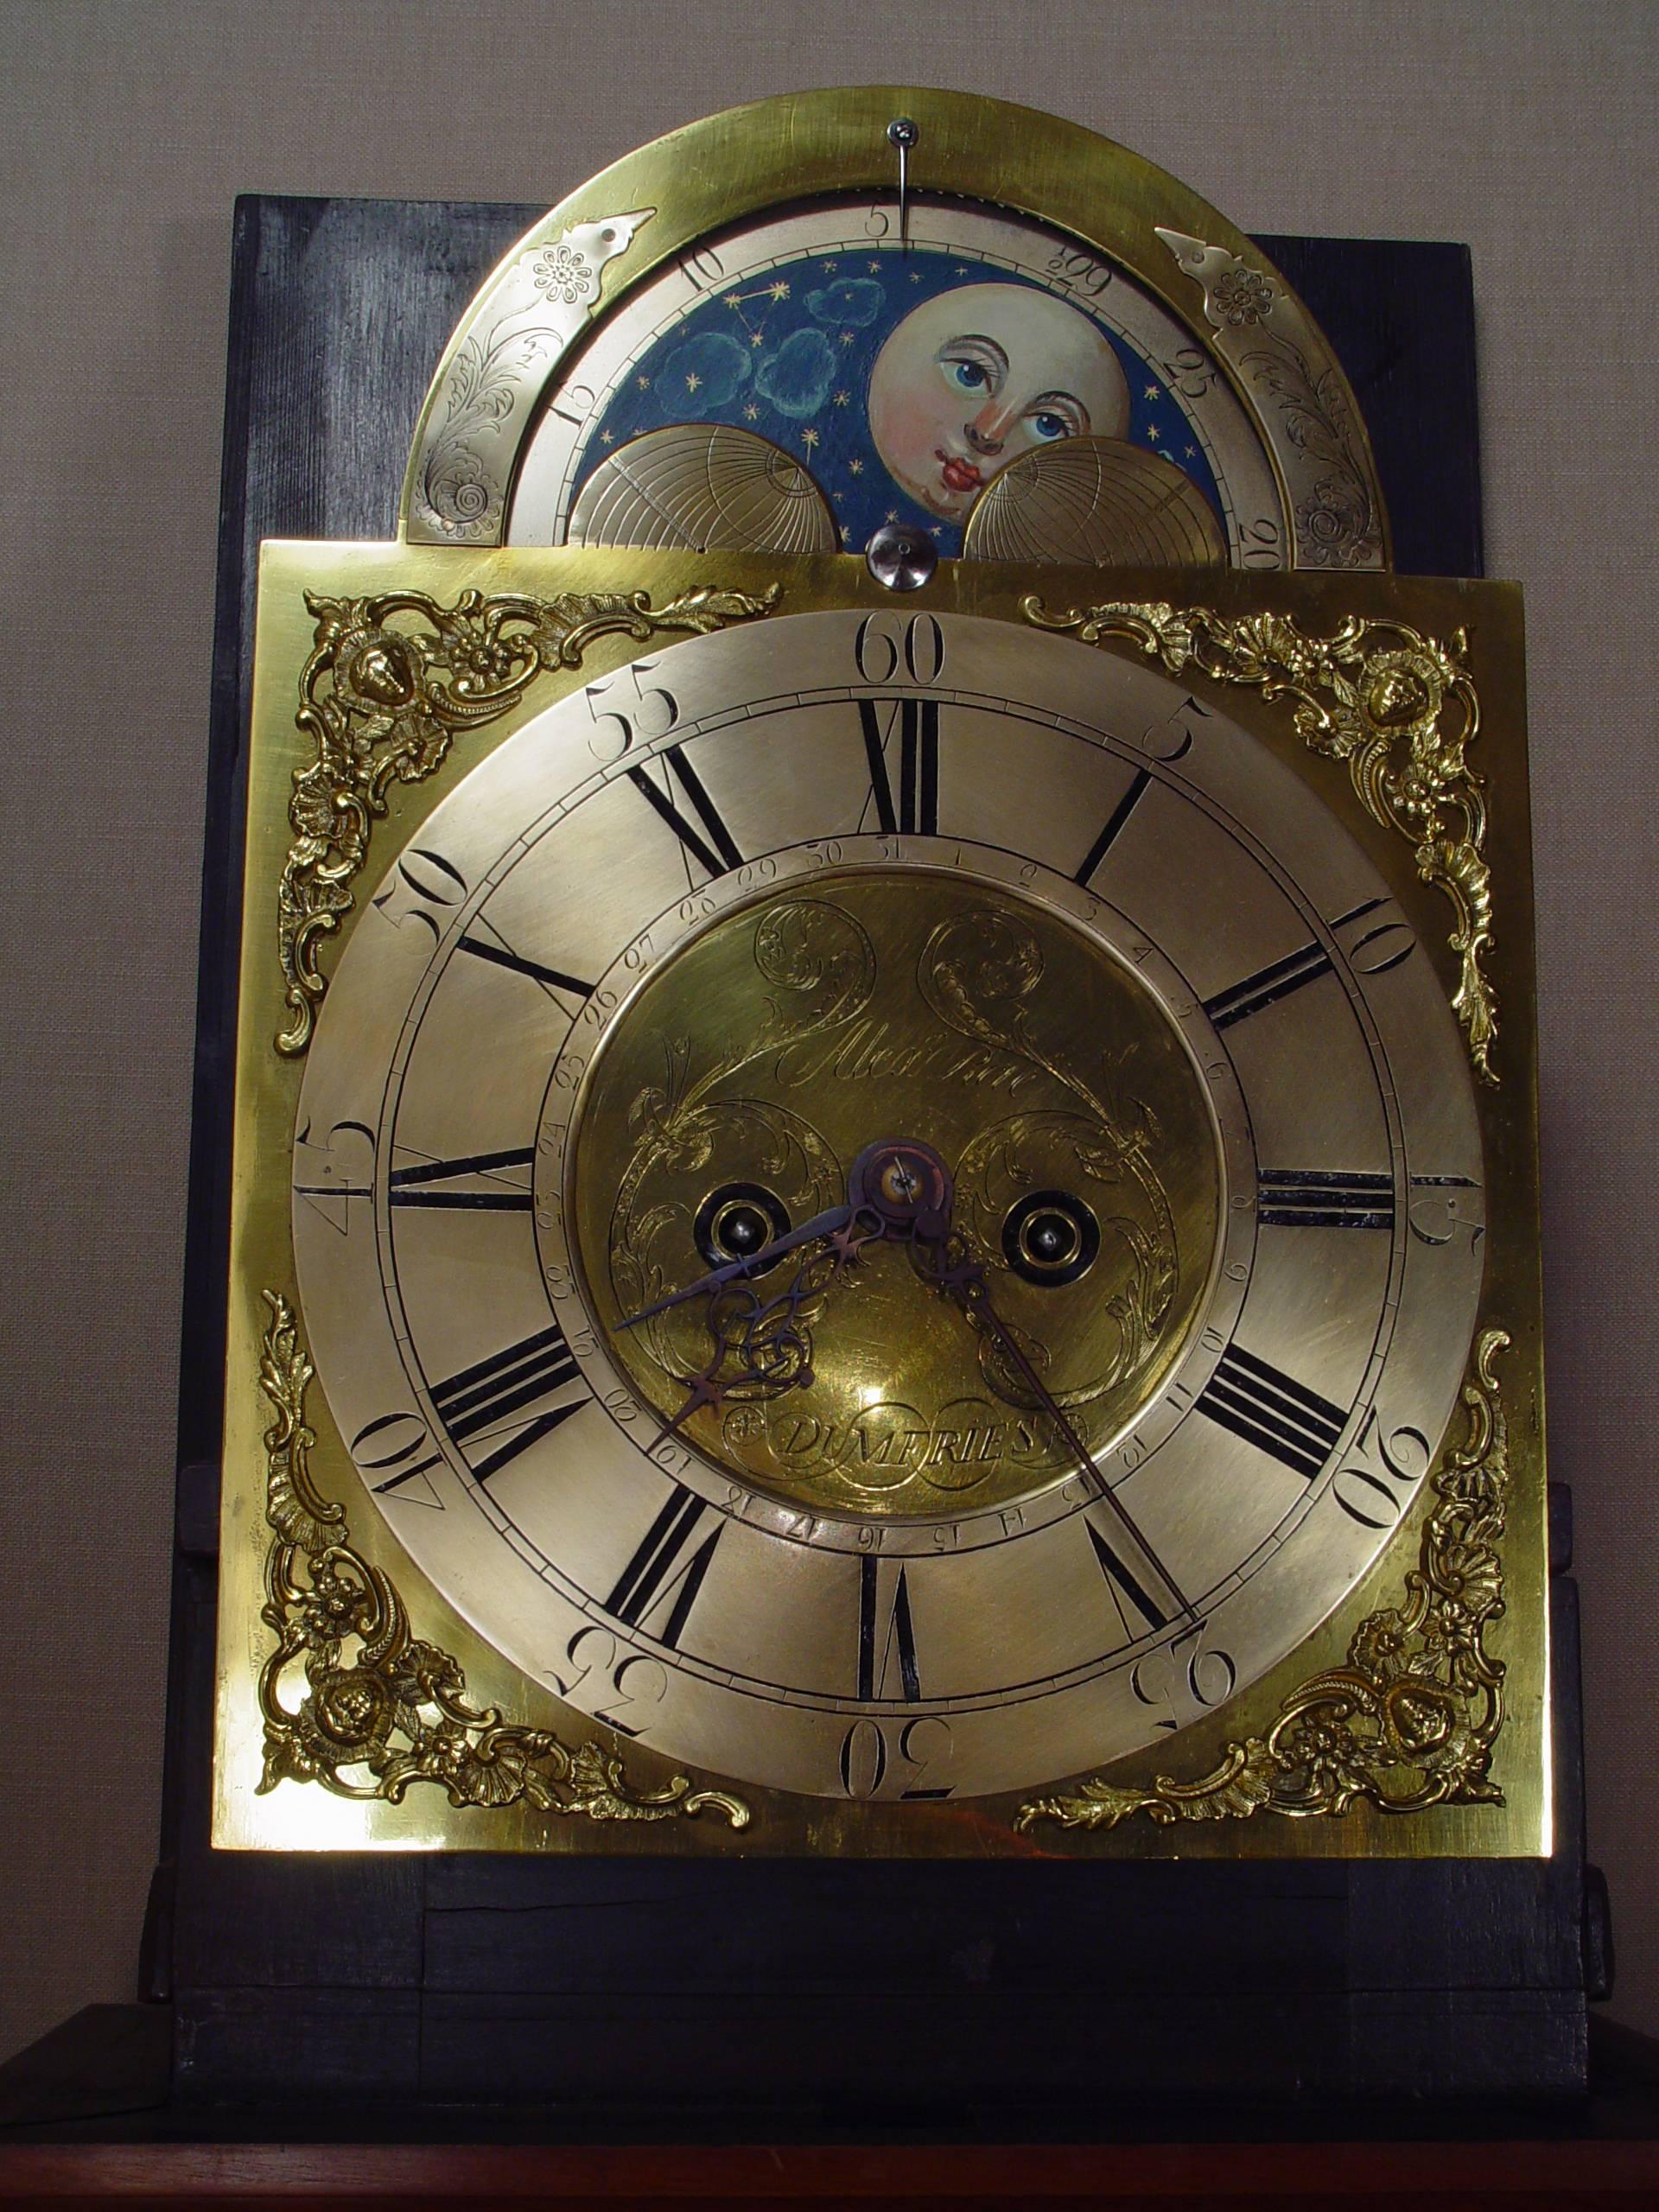 An English mahogany longcase clock with moon phase and date Alex Rae Dumfries, circa 1770 arched brass dial with silvered chapter ring, center with foliate scrolls signed Alex Rae Dumfries, foliate pierced blued hands and date pointer, foliate mask